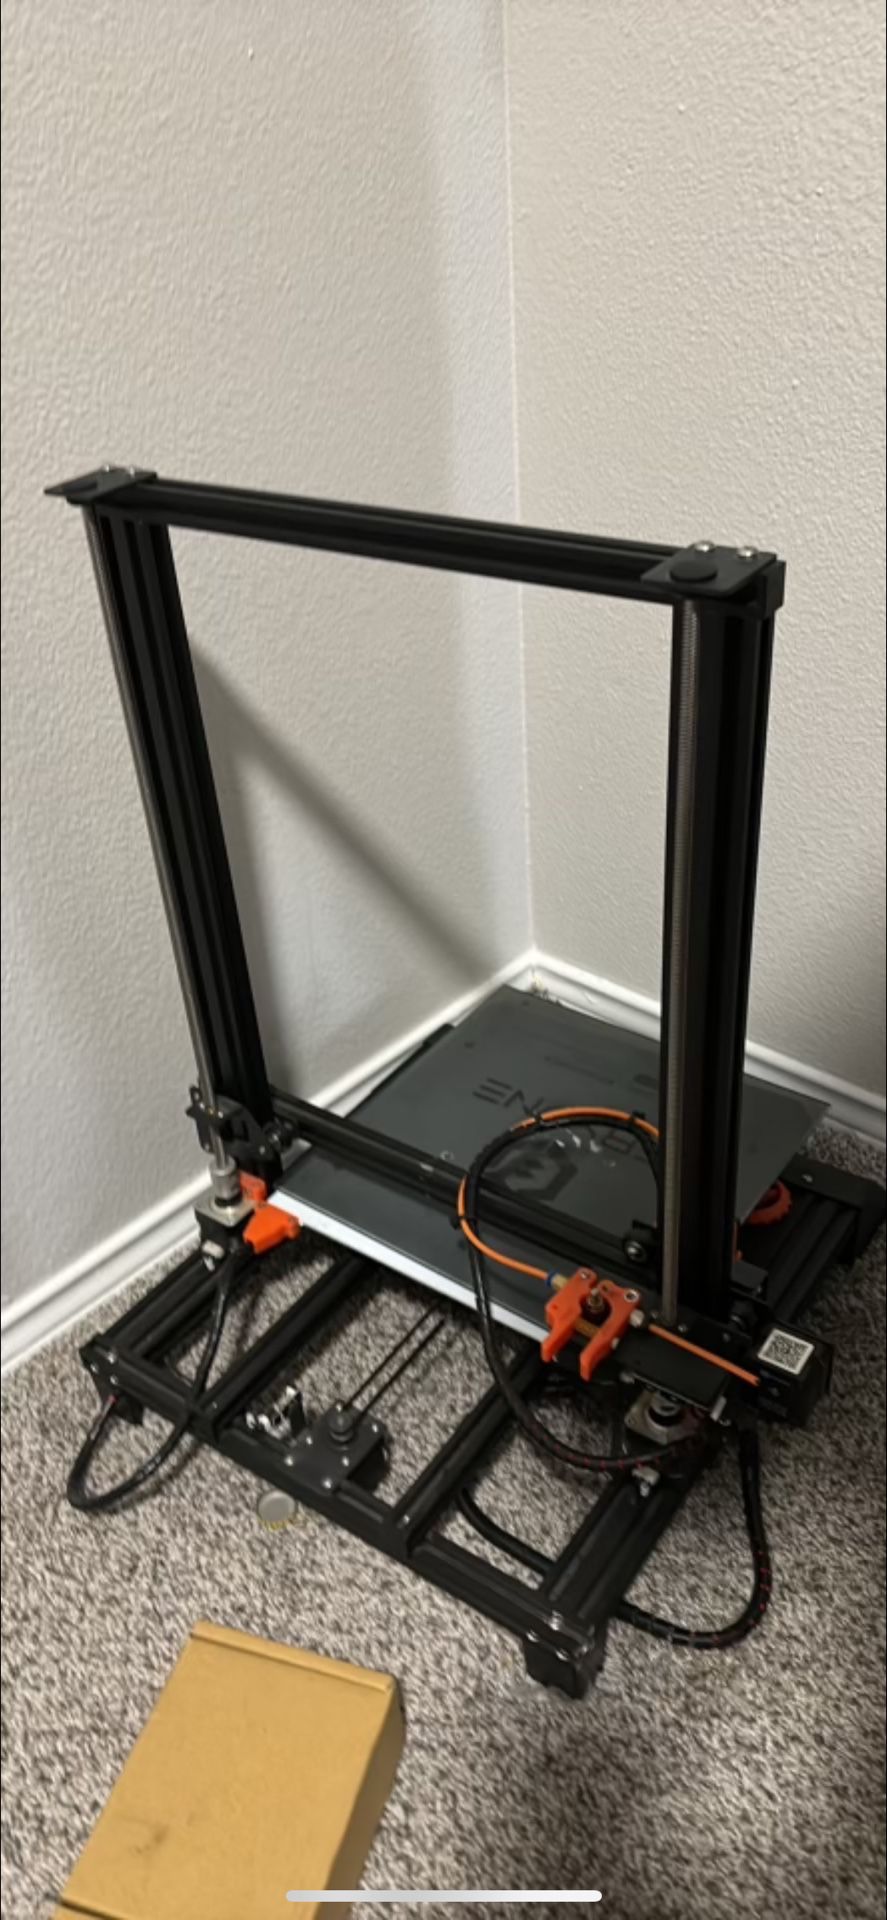 3 D Printer FOR SALE WITH ACCESSORIES